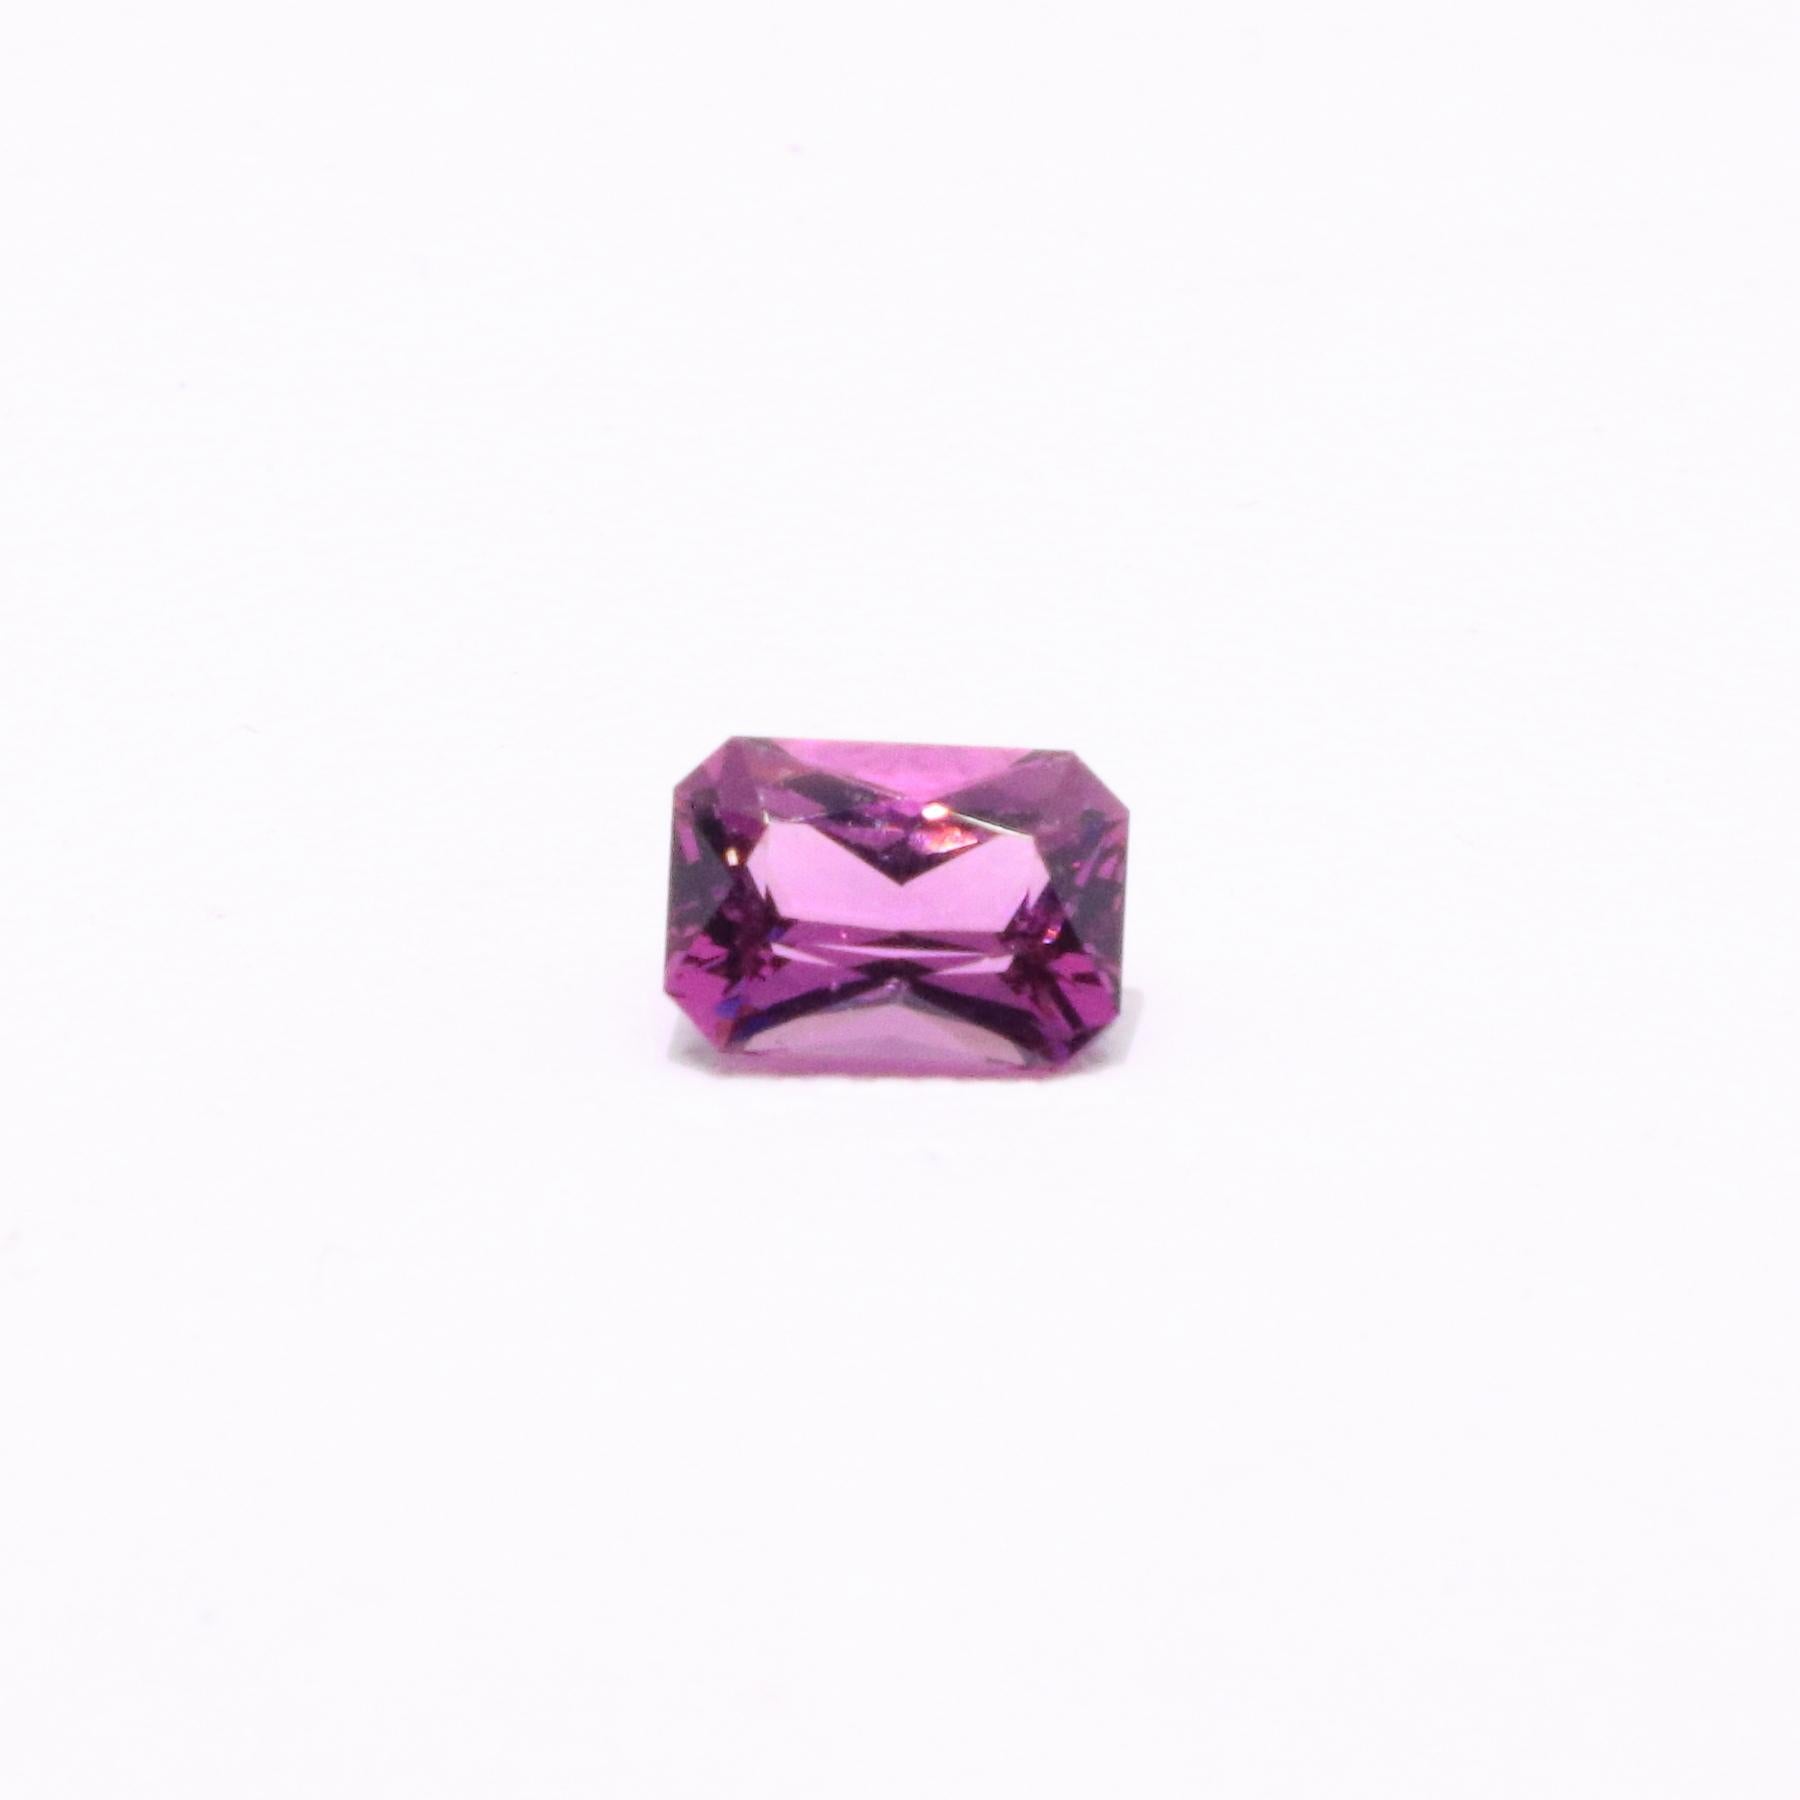 A Vivid Pink Manhenge Garnet, from Tanzania.

It was mined in the Manhenge Mountains region in Tanzania. With its deposits almost depleted, this gem is increasingly rare and most of the rough purchase nowadays are from private owners that held to